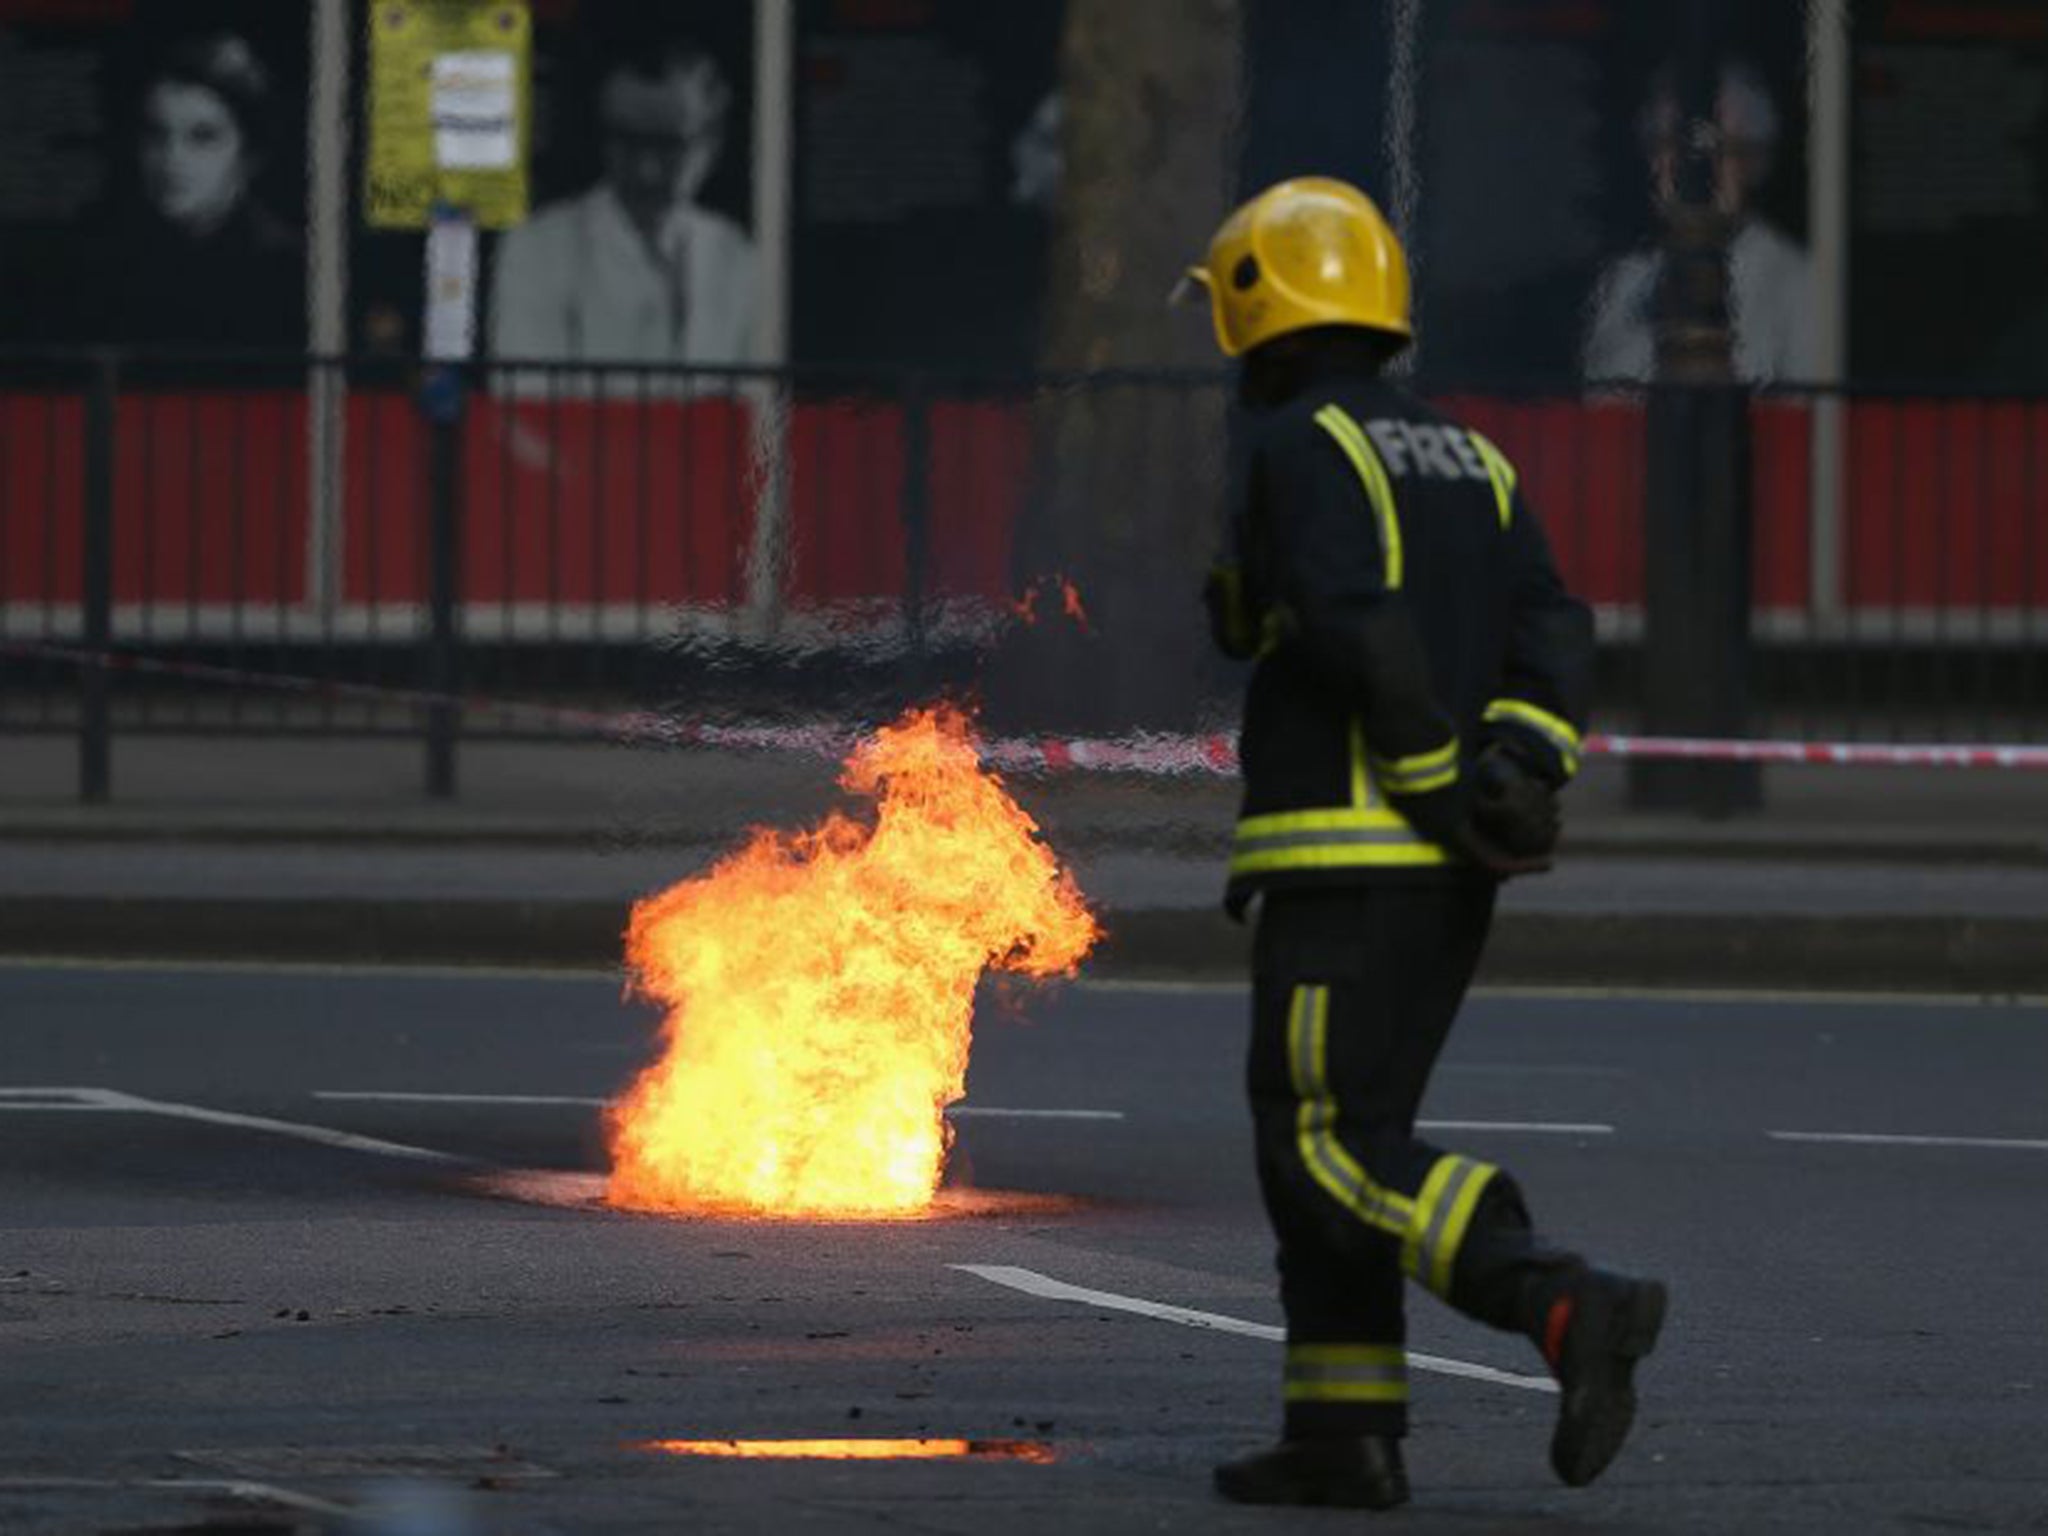 Flames are seen escaping from a manhole cover as fire crews tend to the underground cable fire at Lincoln's Inn Fields